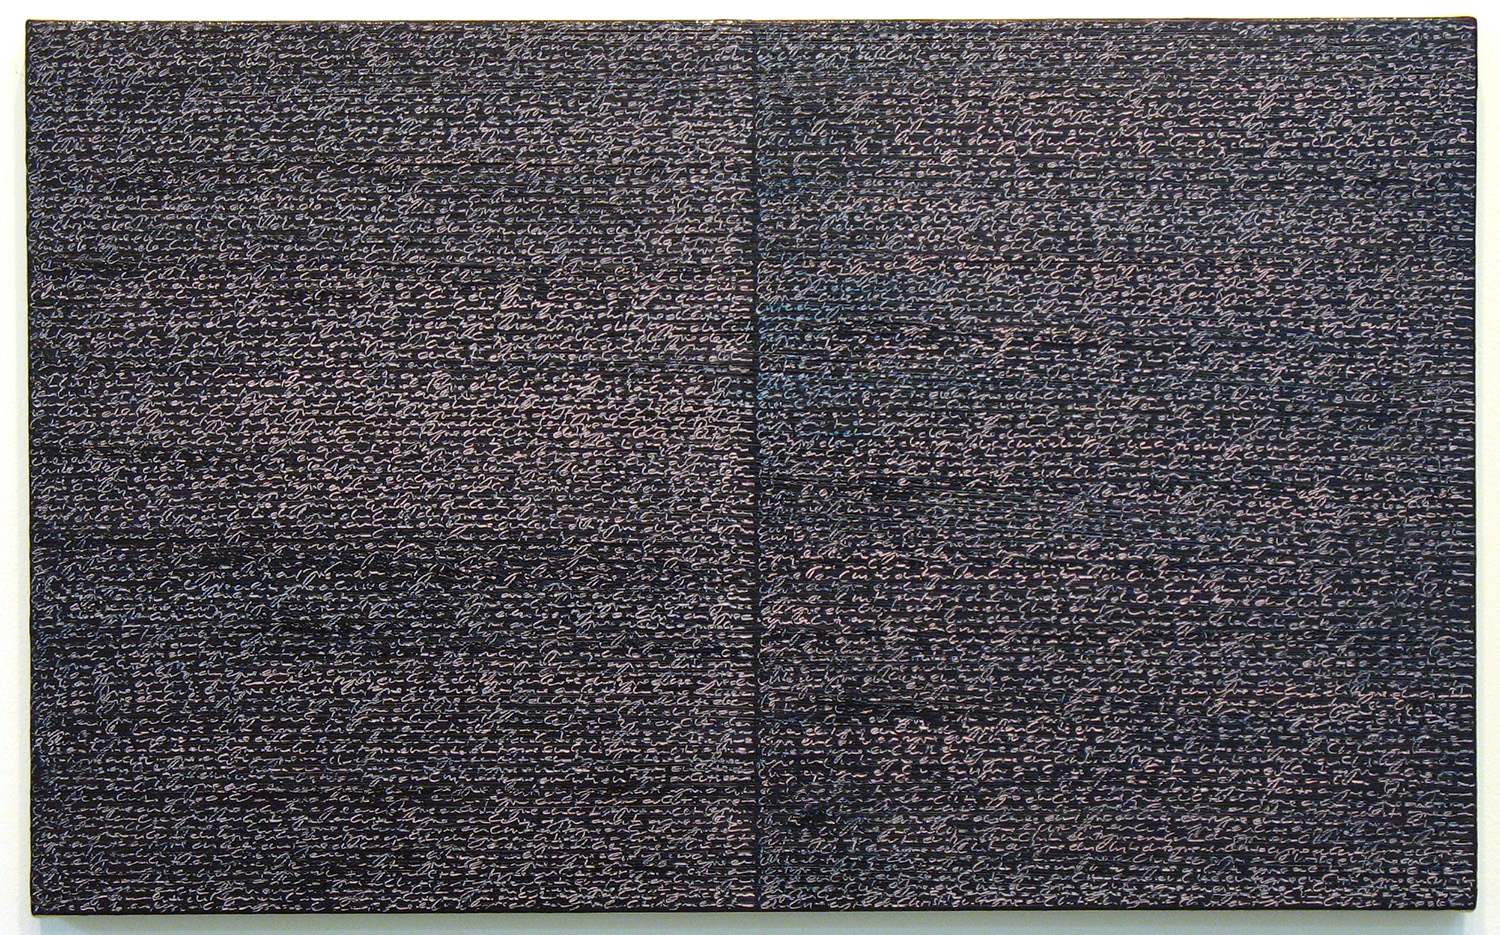 Open Book -pink-indigo-<br>oil and amber on canvas over panel, 37 x 60 cm, 2008